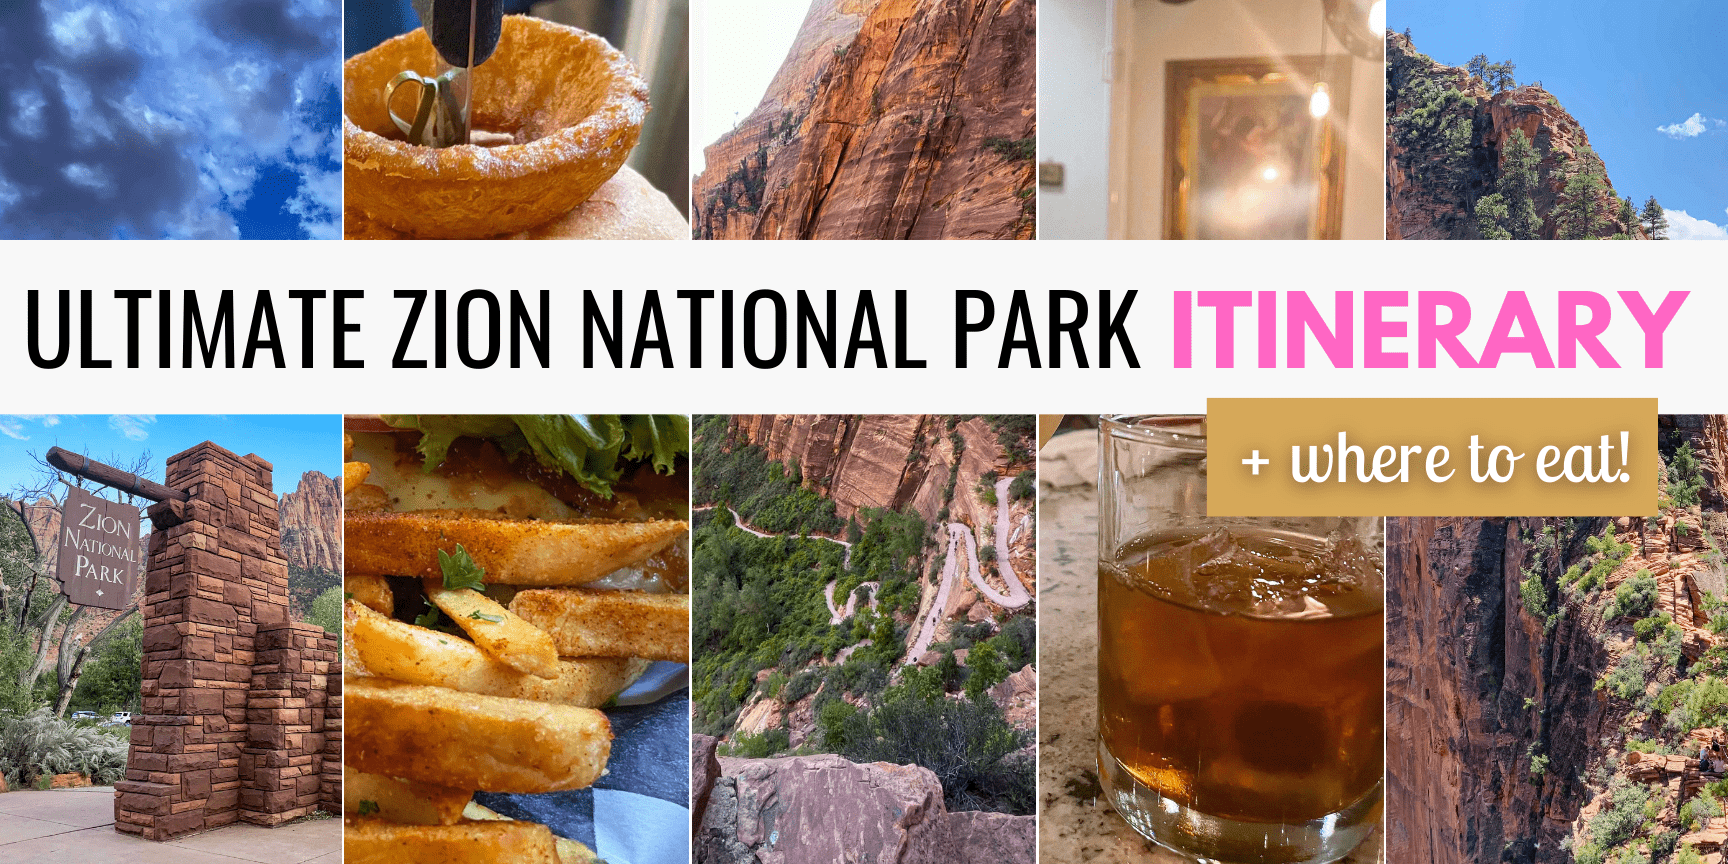 Ultimate Zion National Park Itinerary + Where to Eat